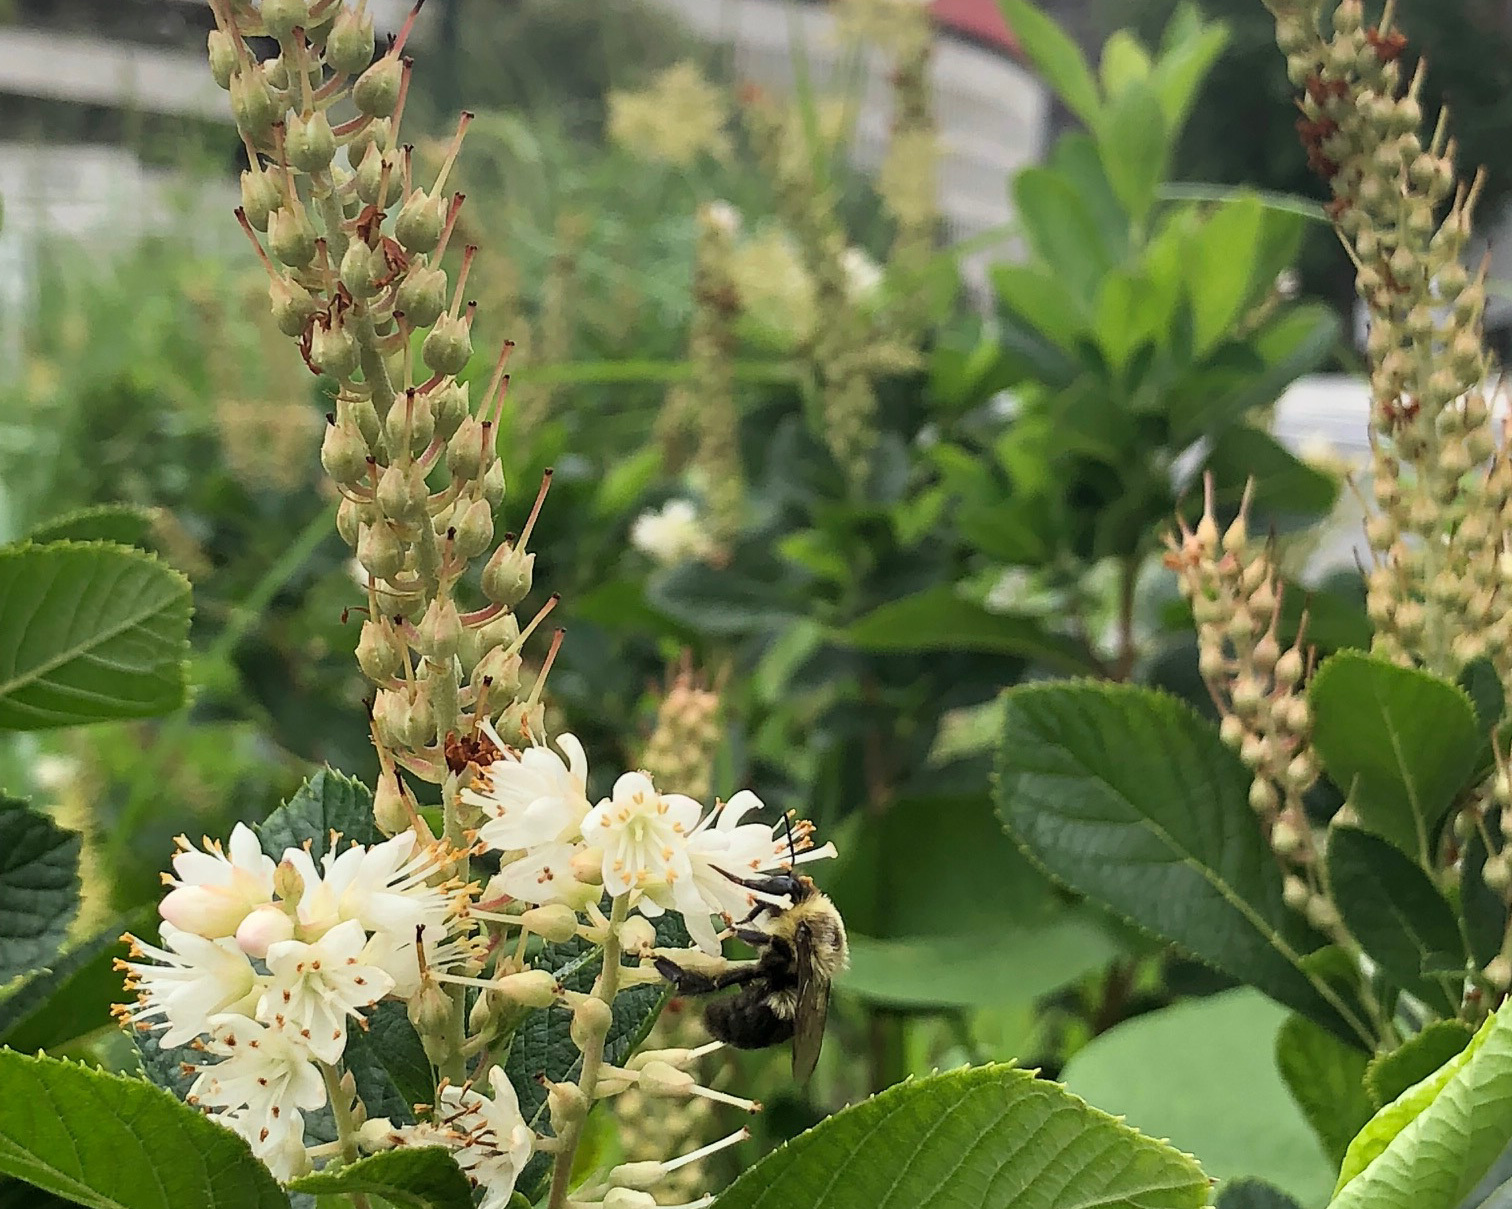 Sweet Pepperbush planted at Justice Avenue attracts pollinators such as bees. Photo: NYC Audubon